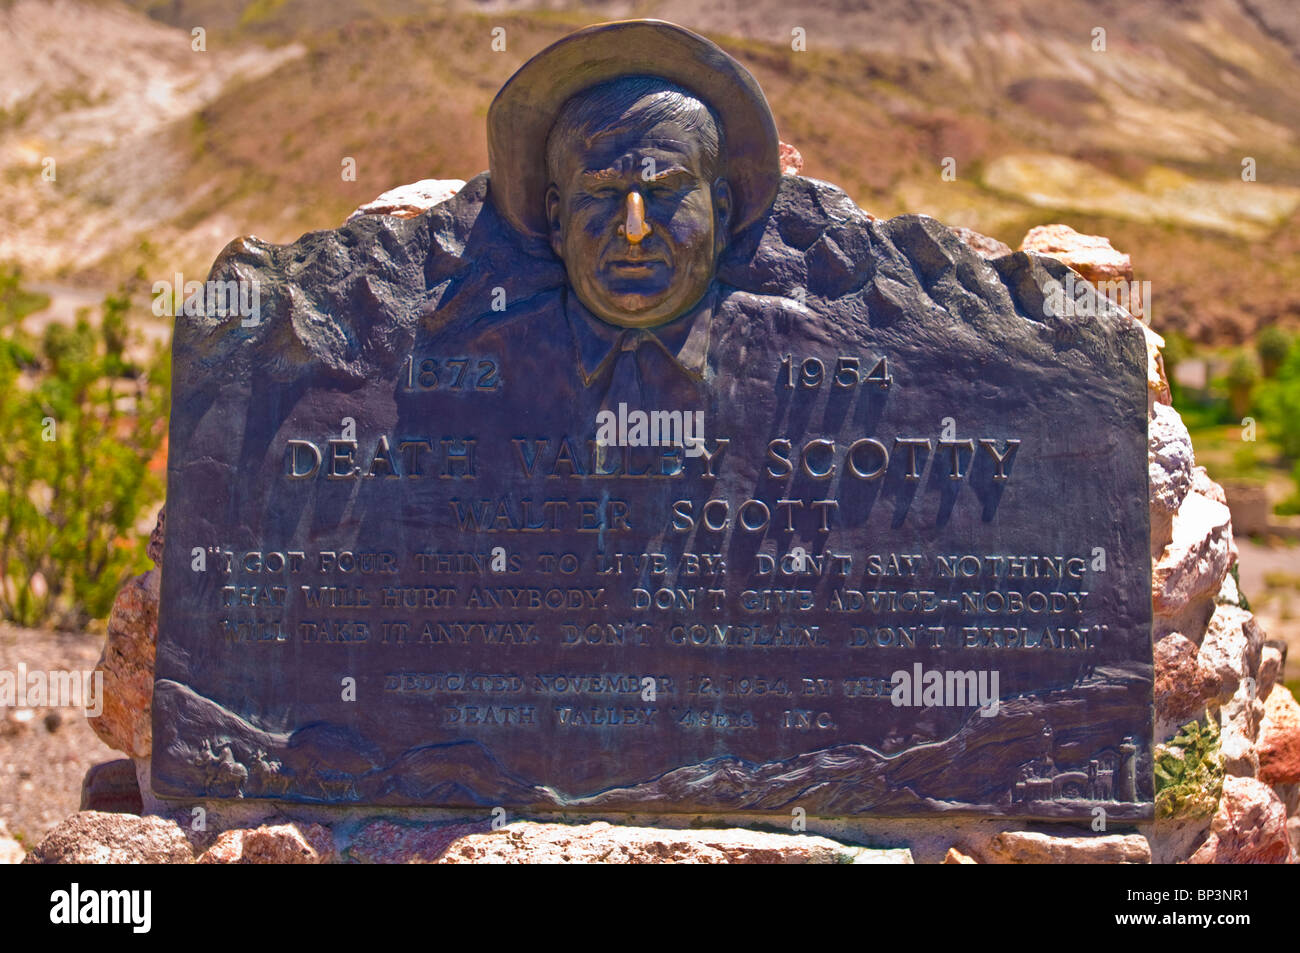 Grave of Walter Scott (Death Valley Scotty), Scottys Castle, Death Valley National Park. California Stock Photo